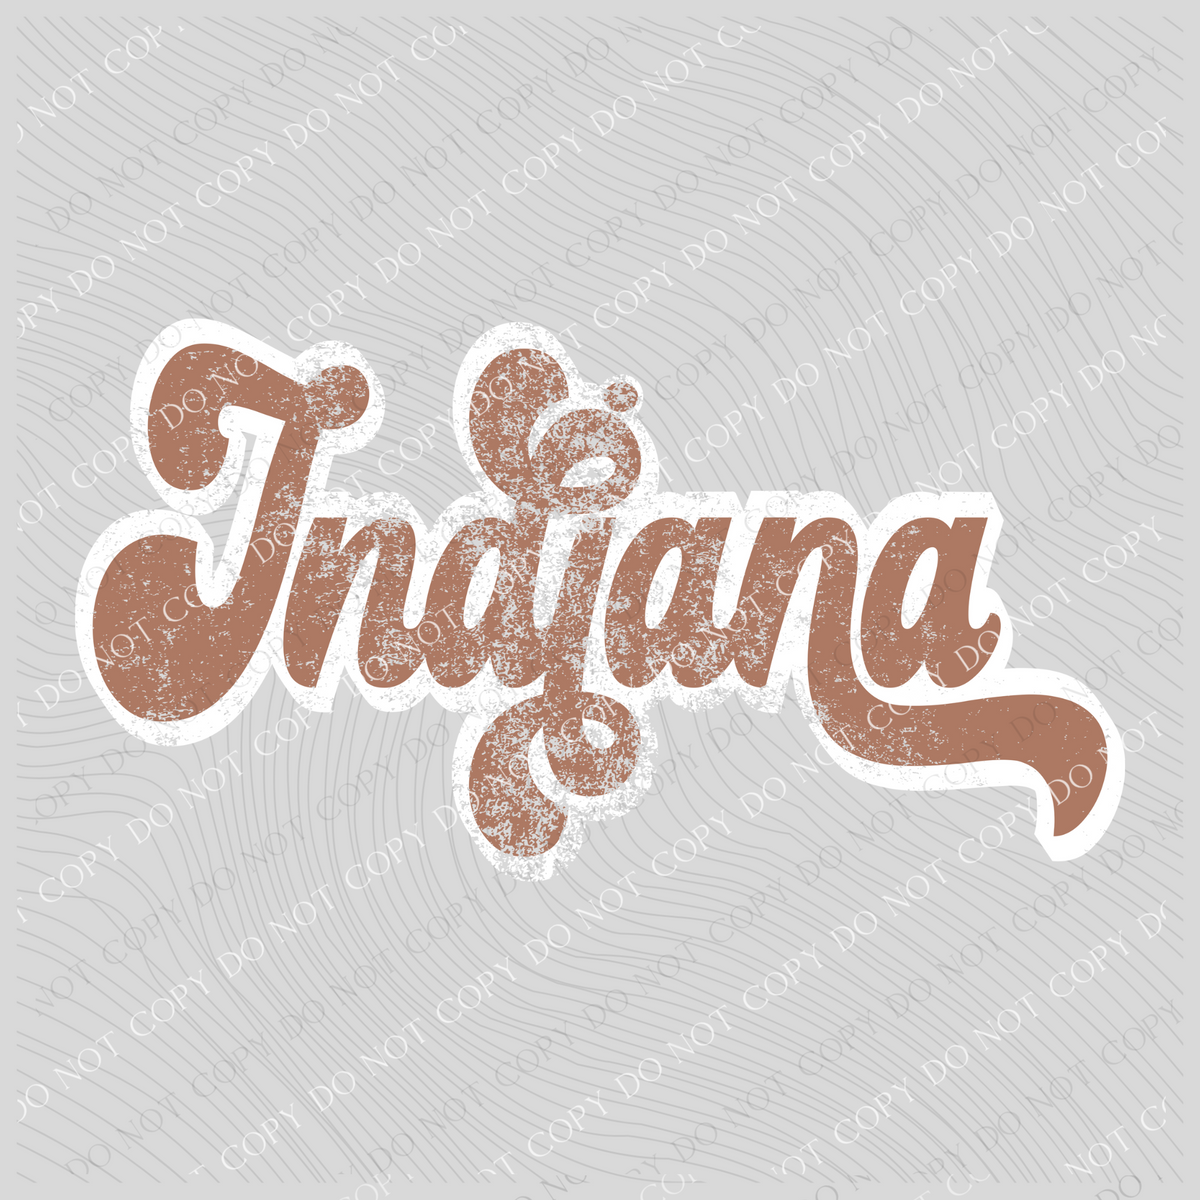 Indiana Chestnut & White Retro Shadow Distressed Digital Download, PNG